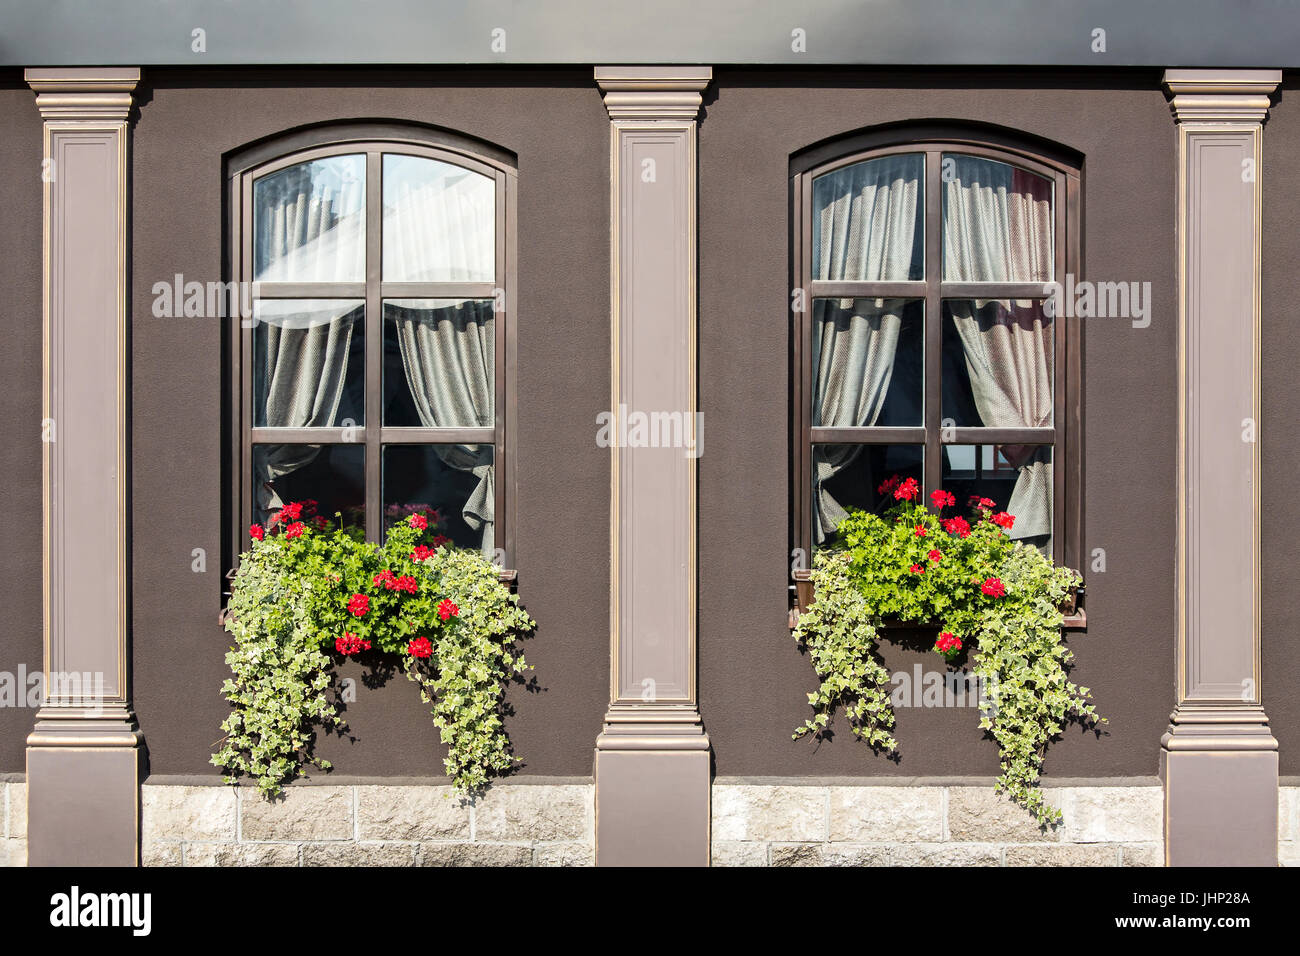 old house with windows decorated with geranium flowers and ivy in flower boxes Stock Photo